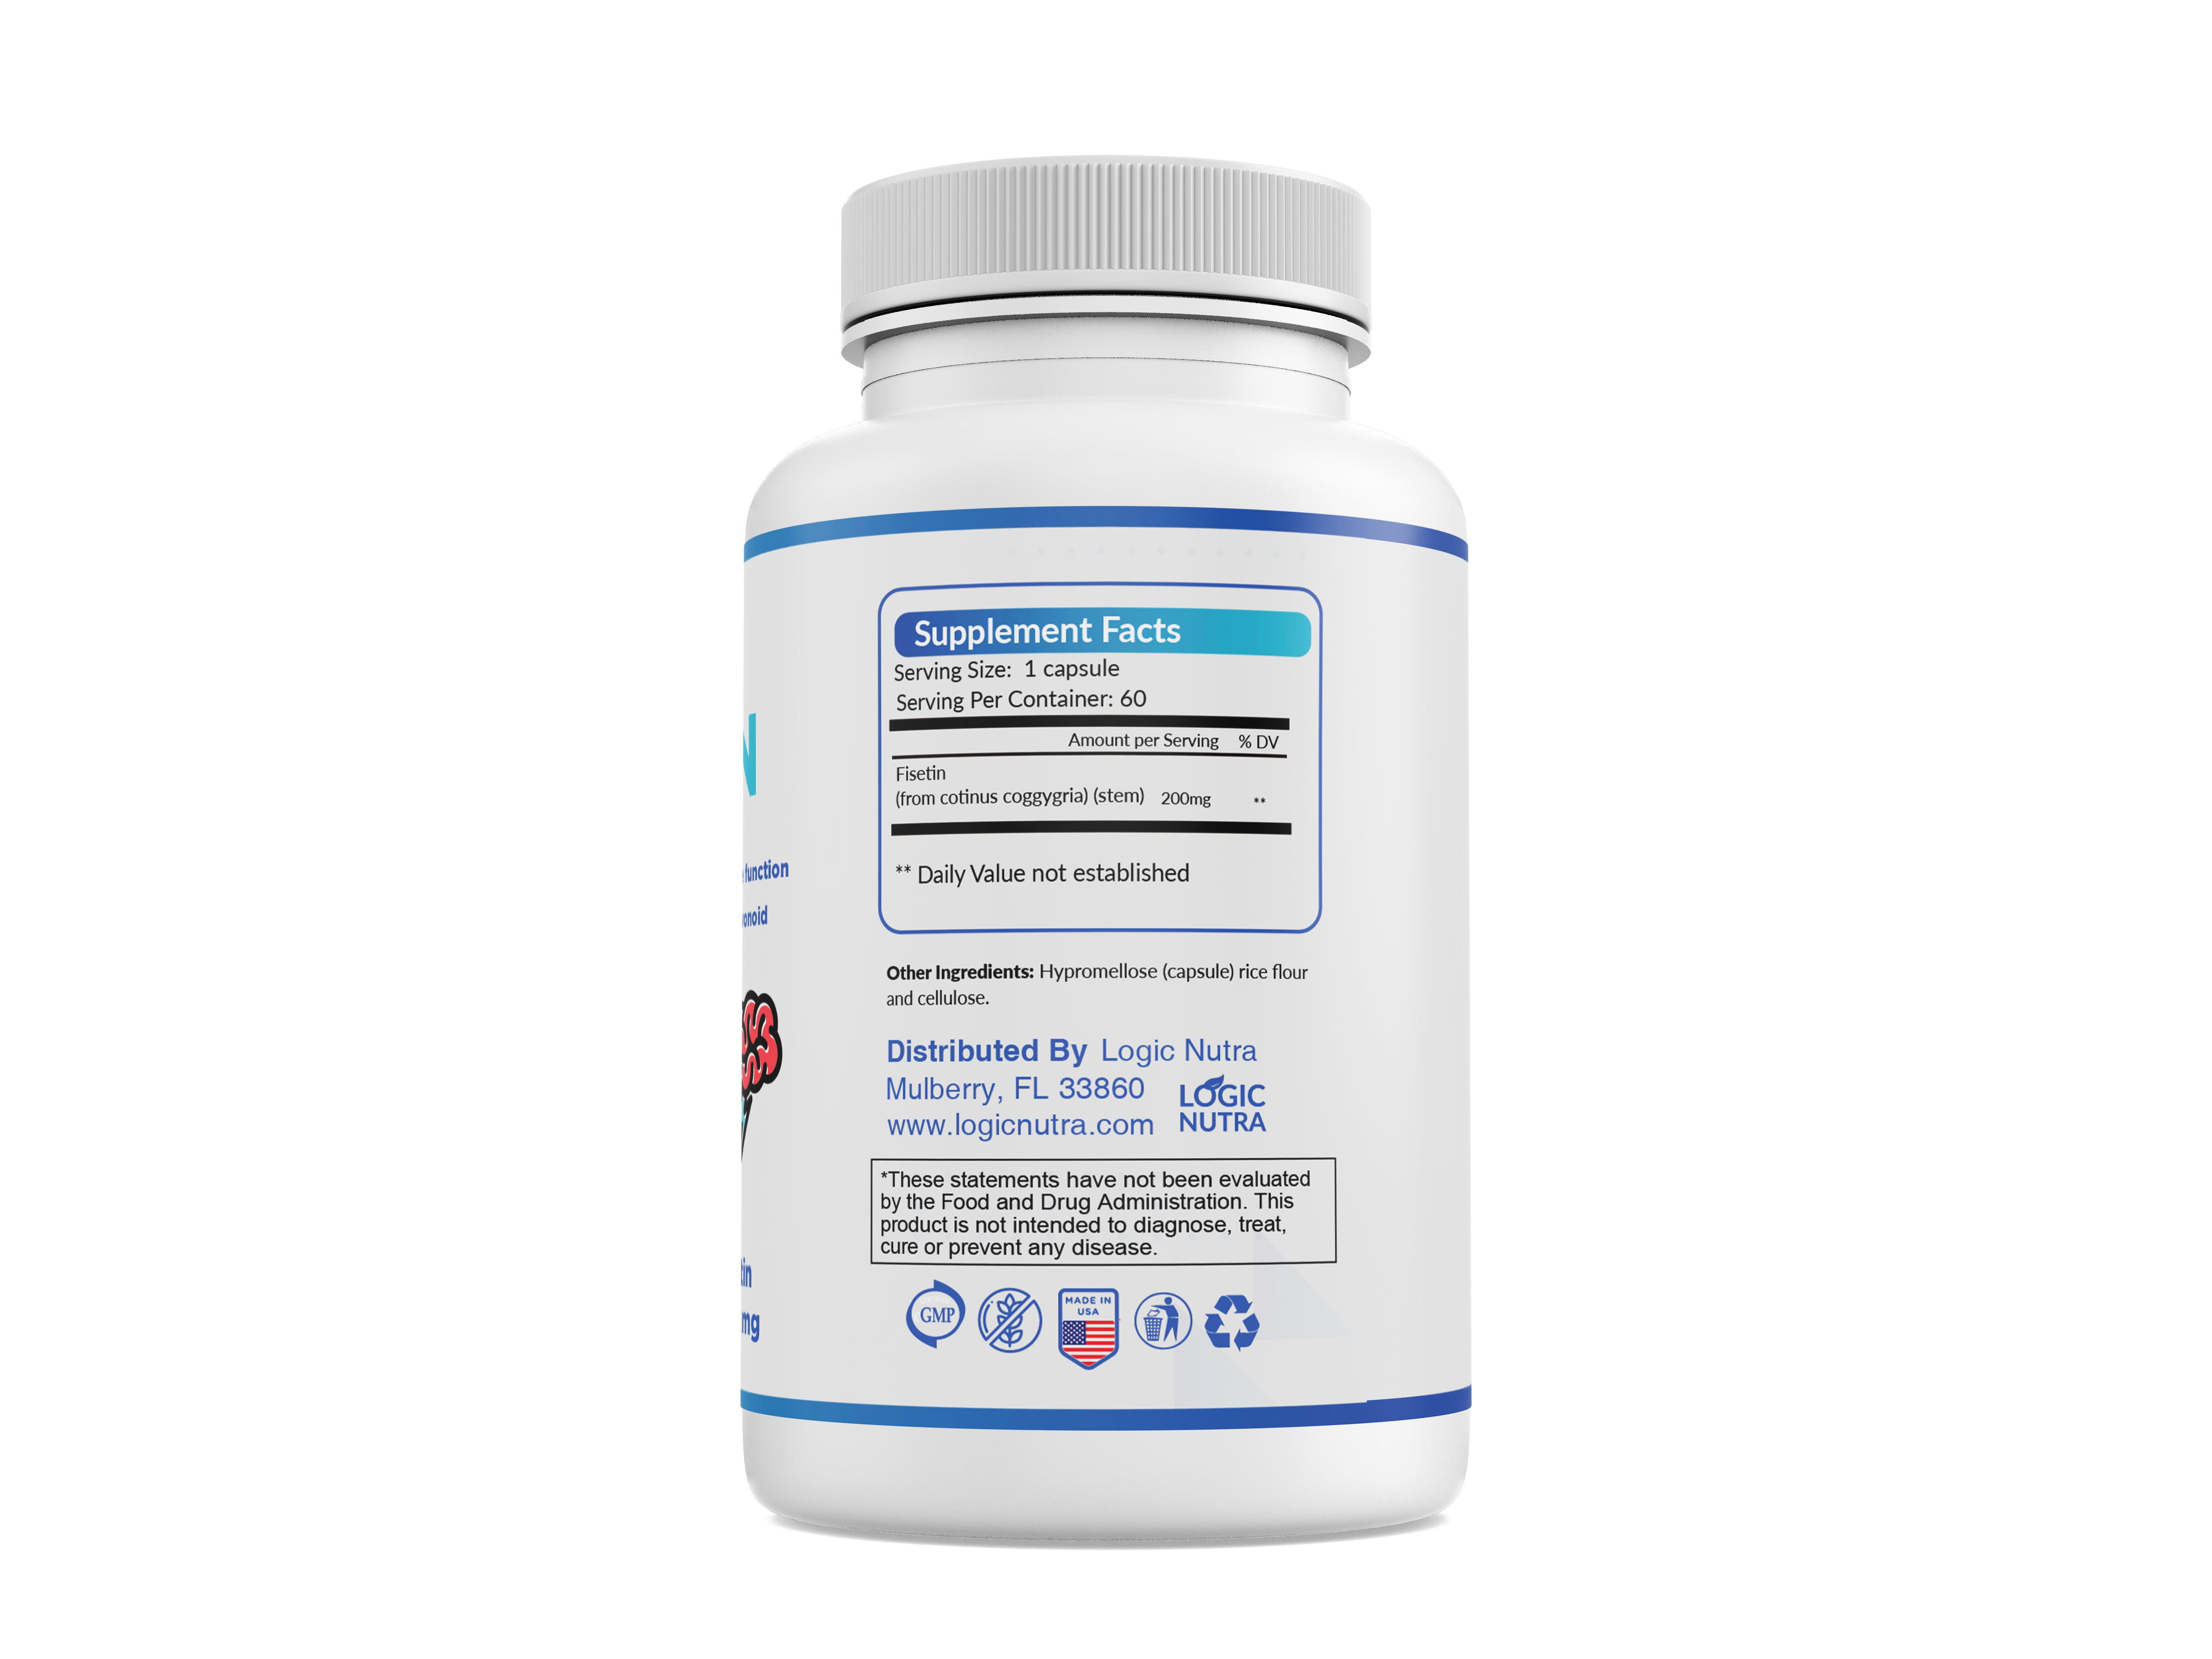 Buy Phenq Nutraceutical 500 mg 60 Tablets Online at Best Prices in India -  JioMart.